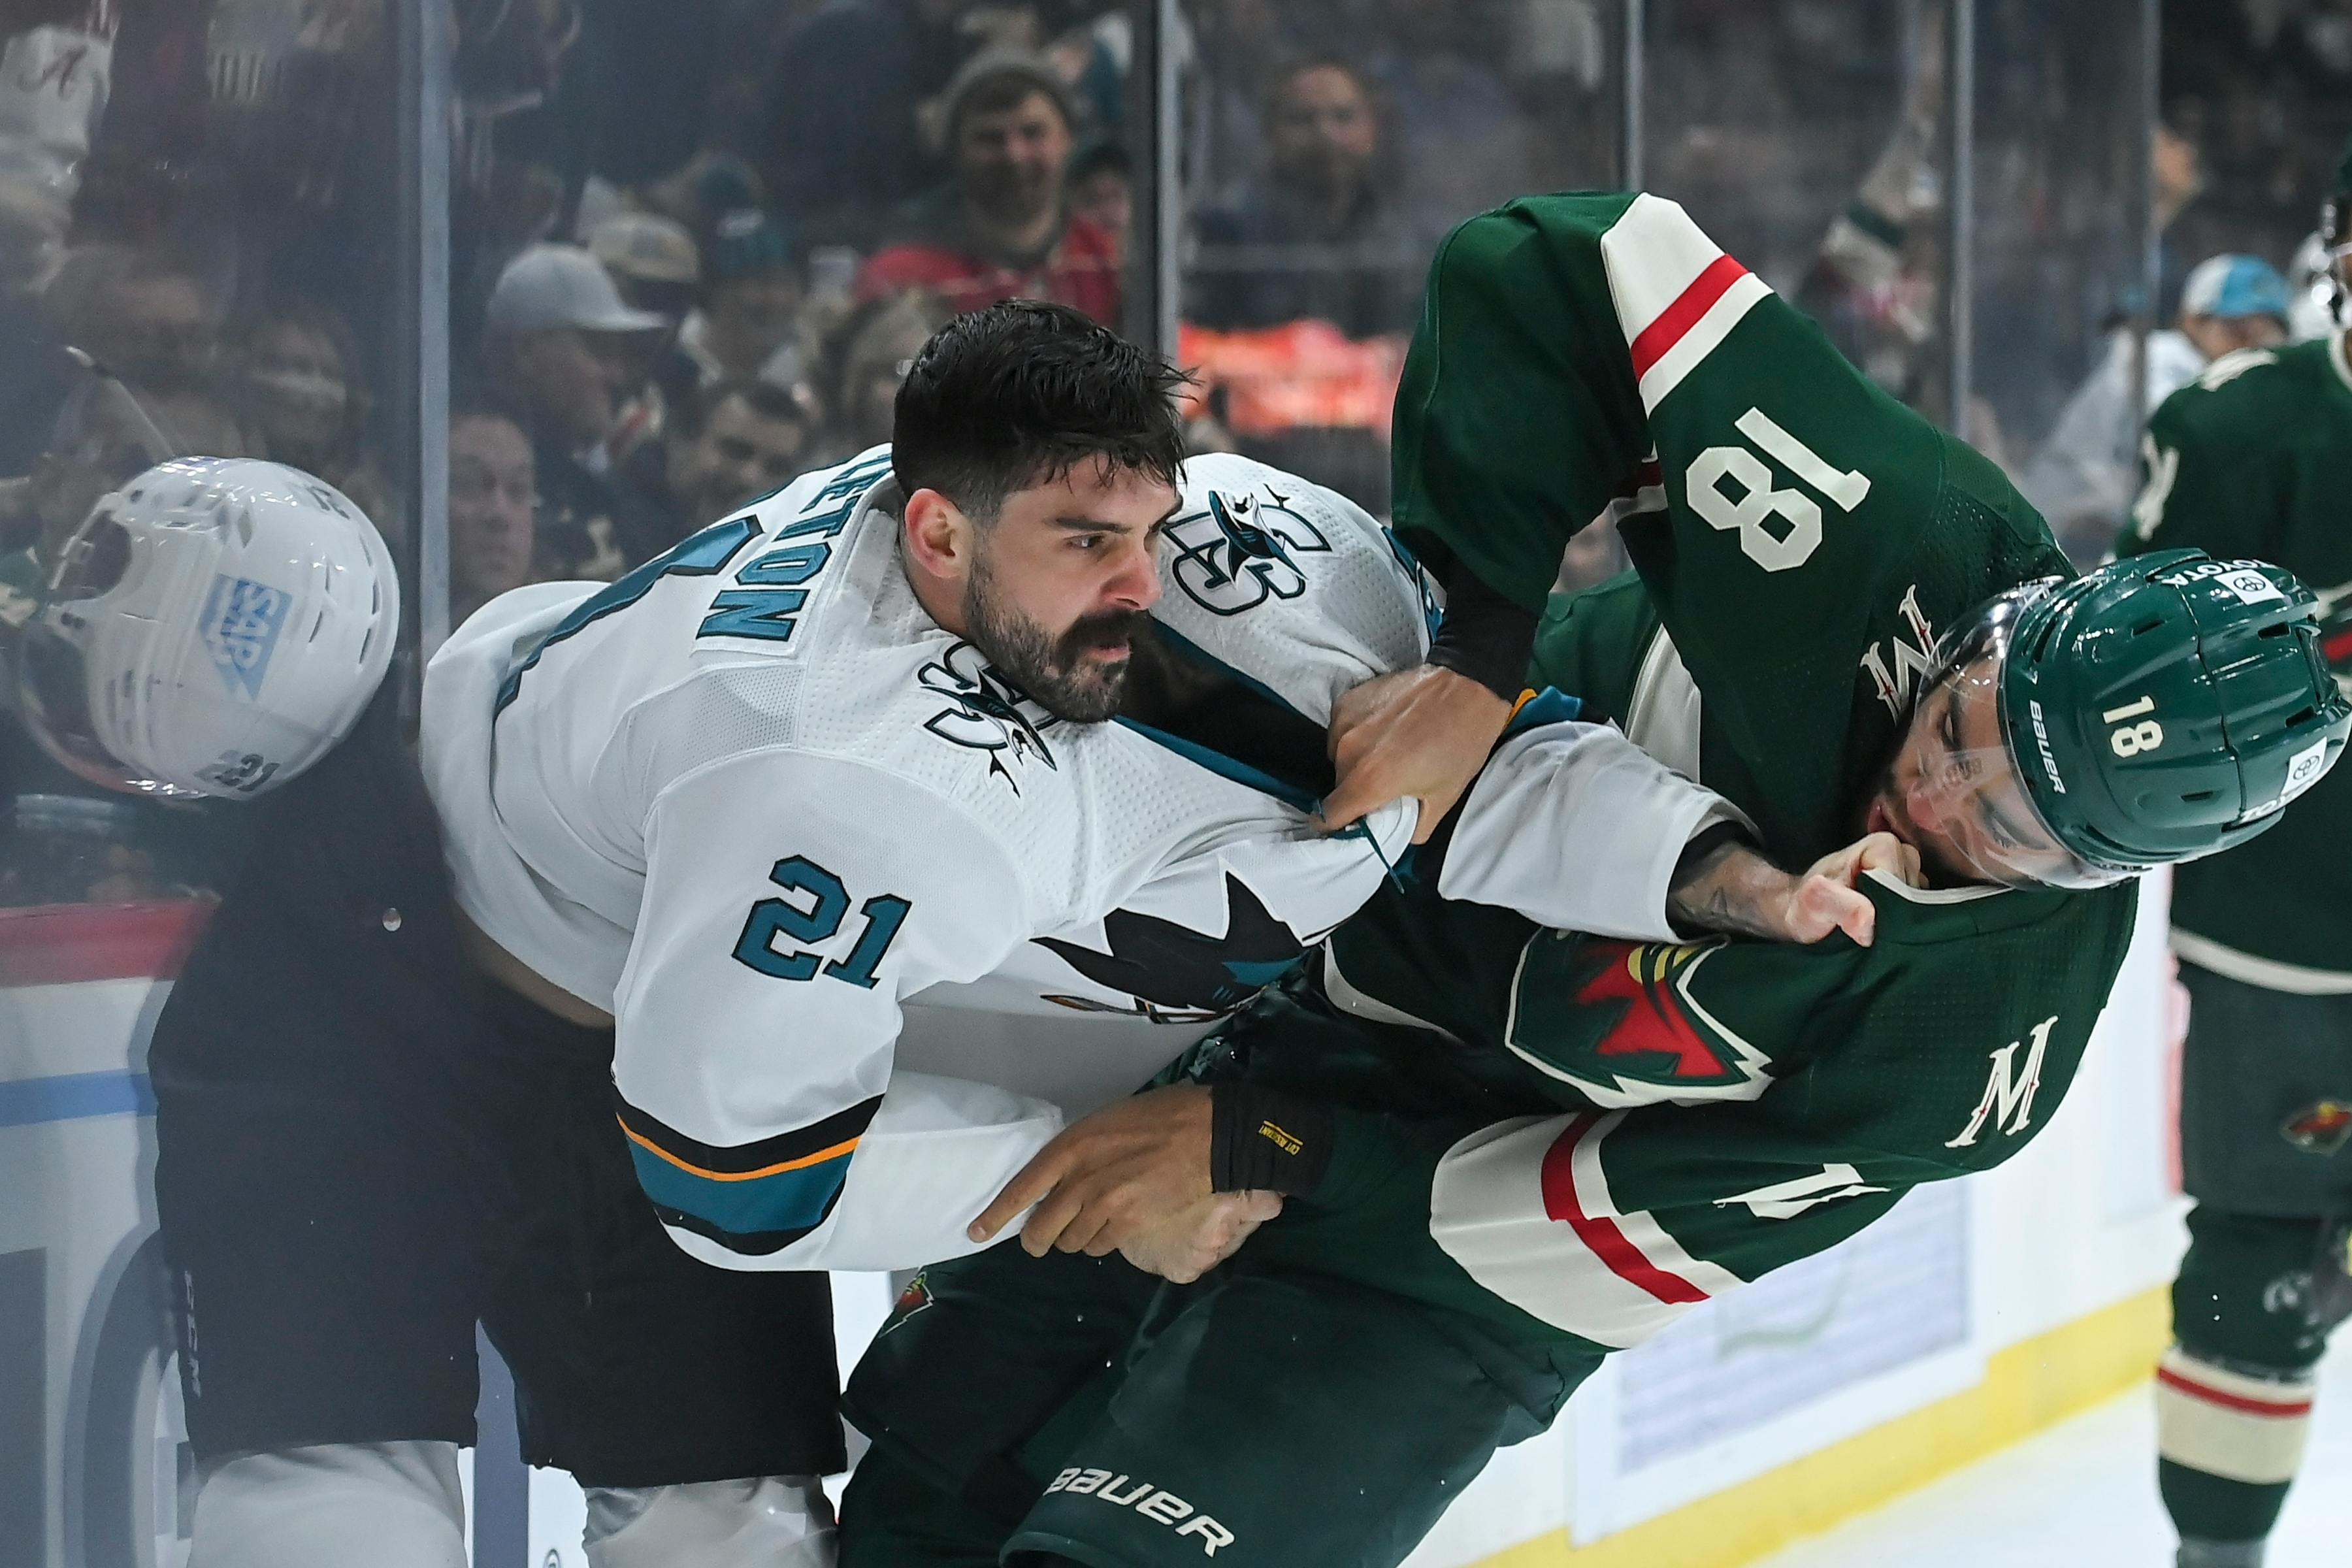 Minnesota Wild signs Jake Middleton to 3-year, $7.35 million contract